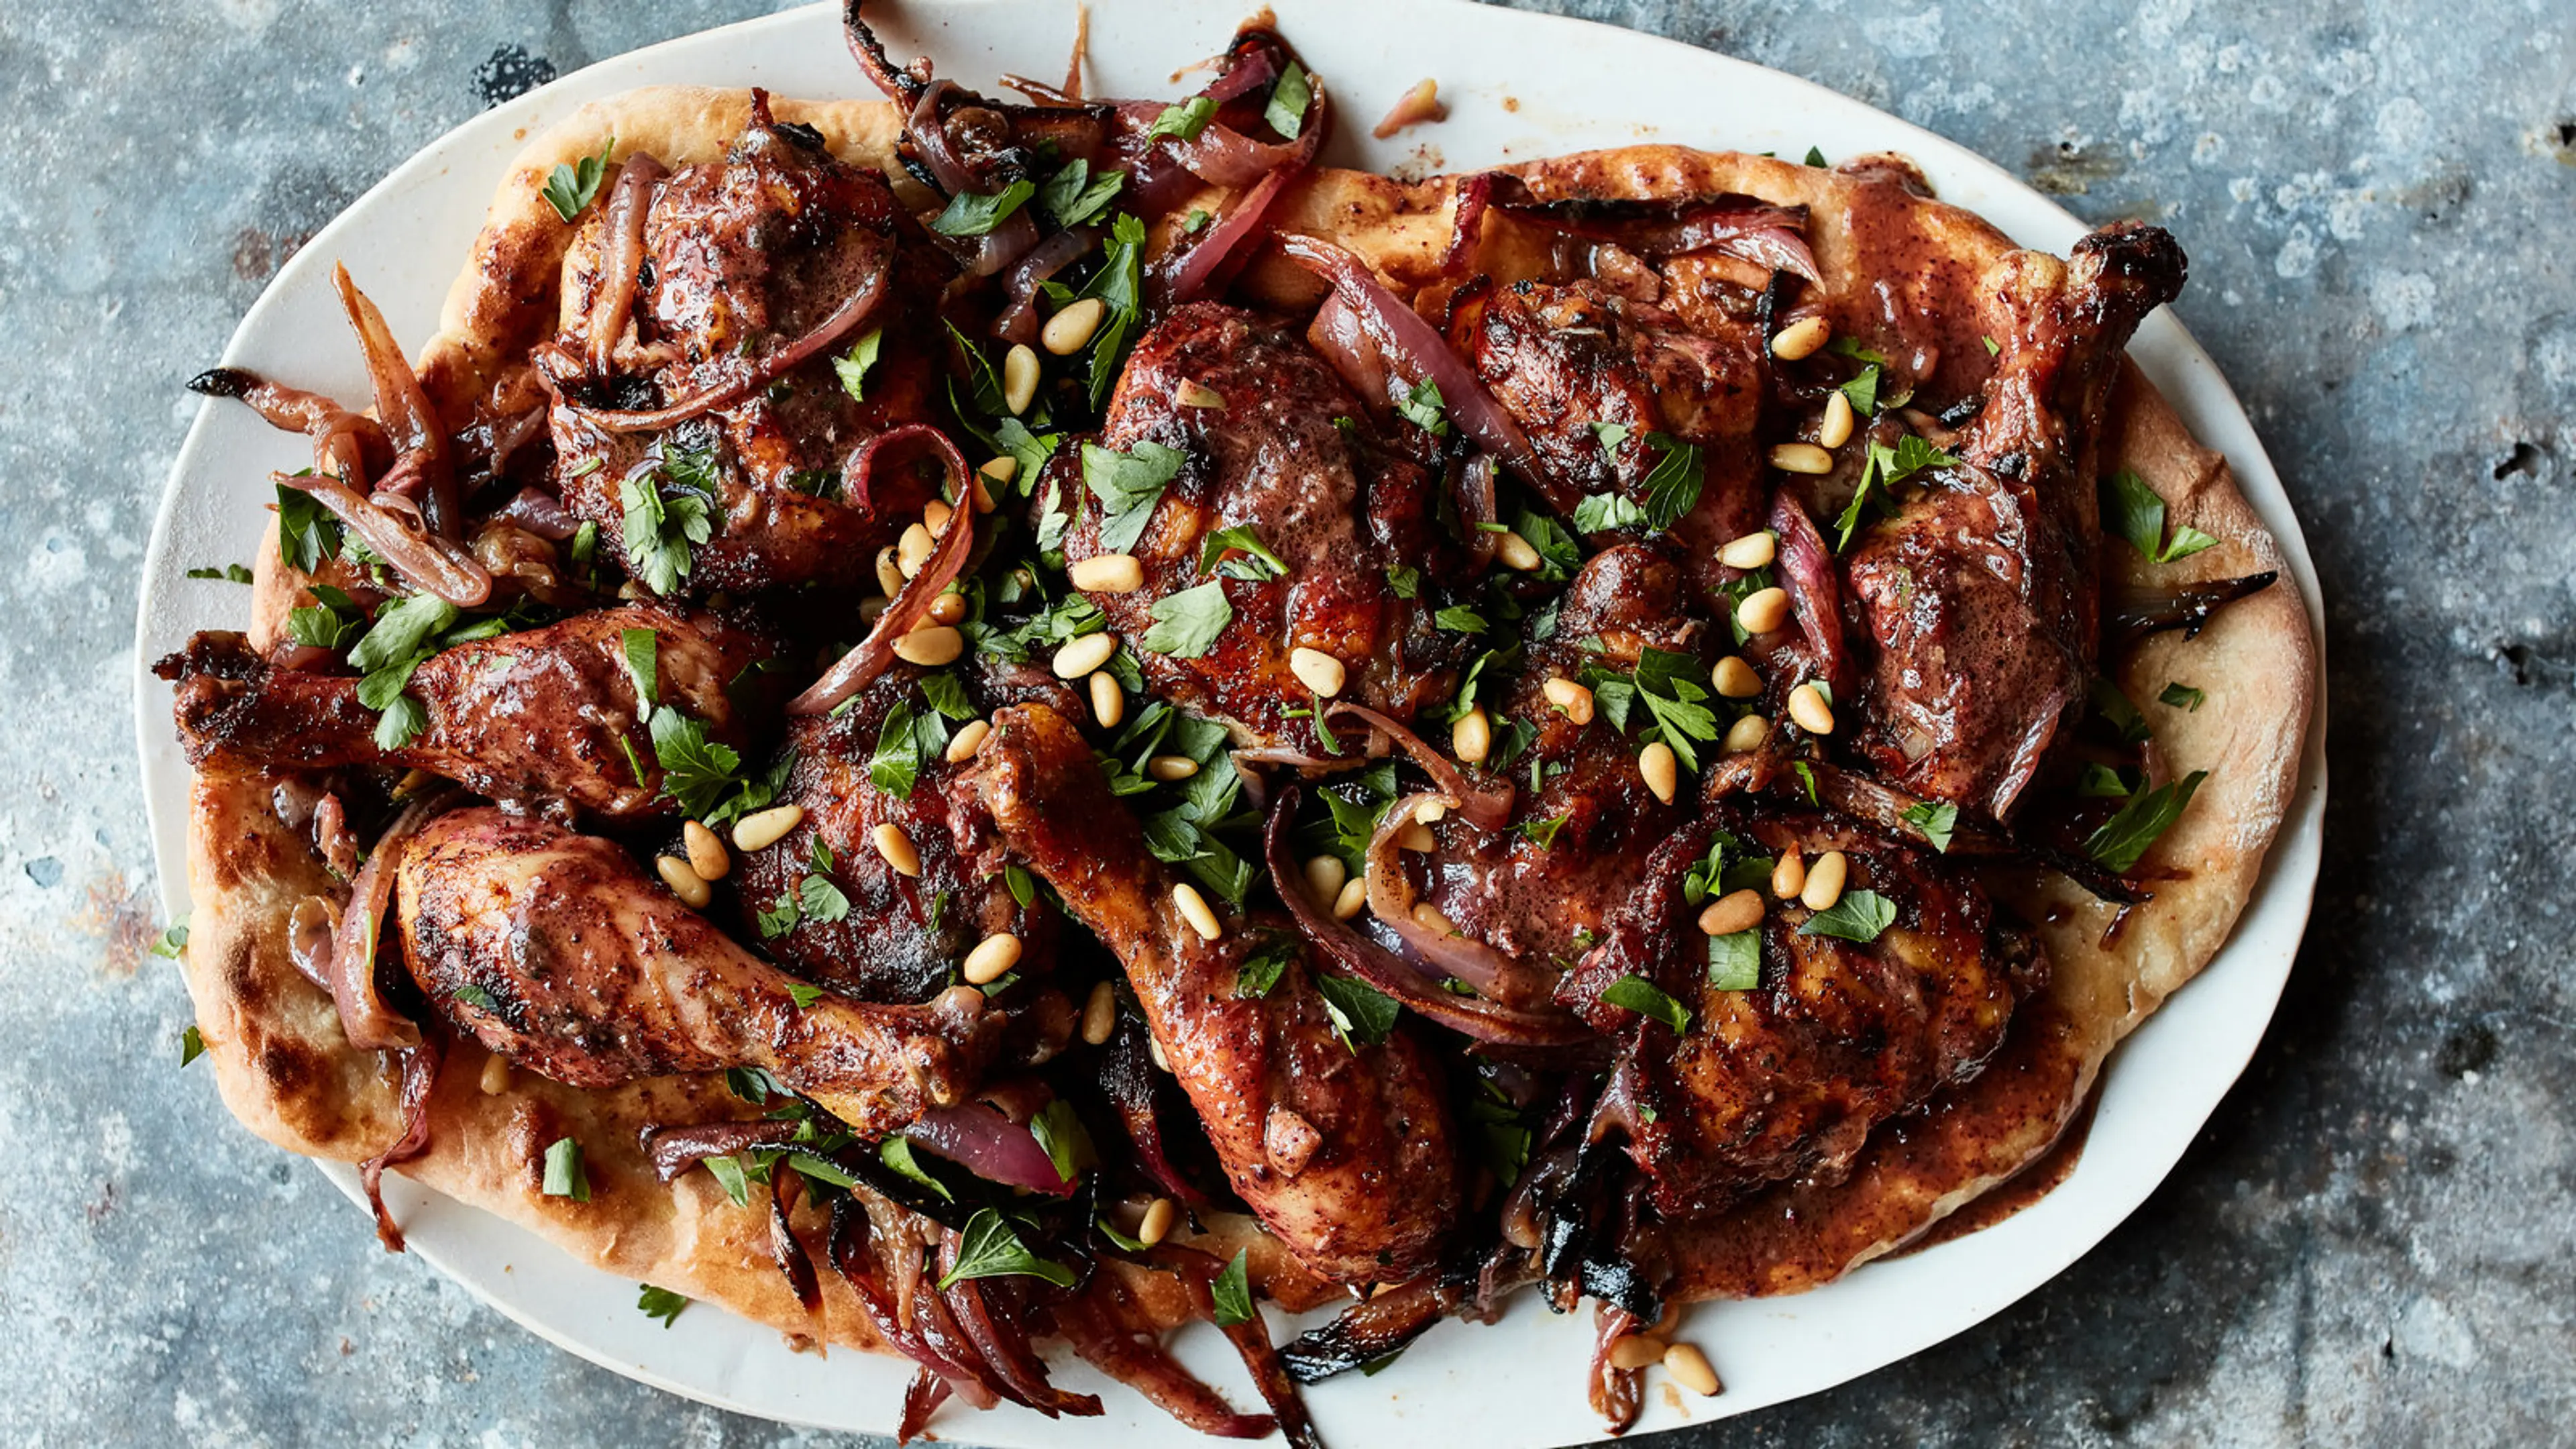 Mussakhan (Roast Chicken With Sumac and Red Onions)